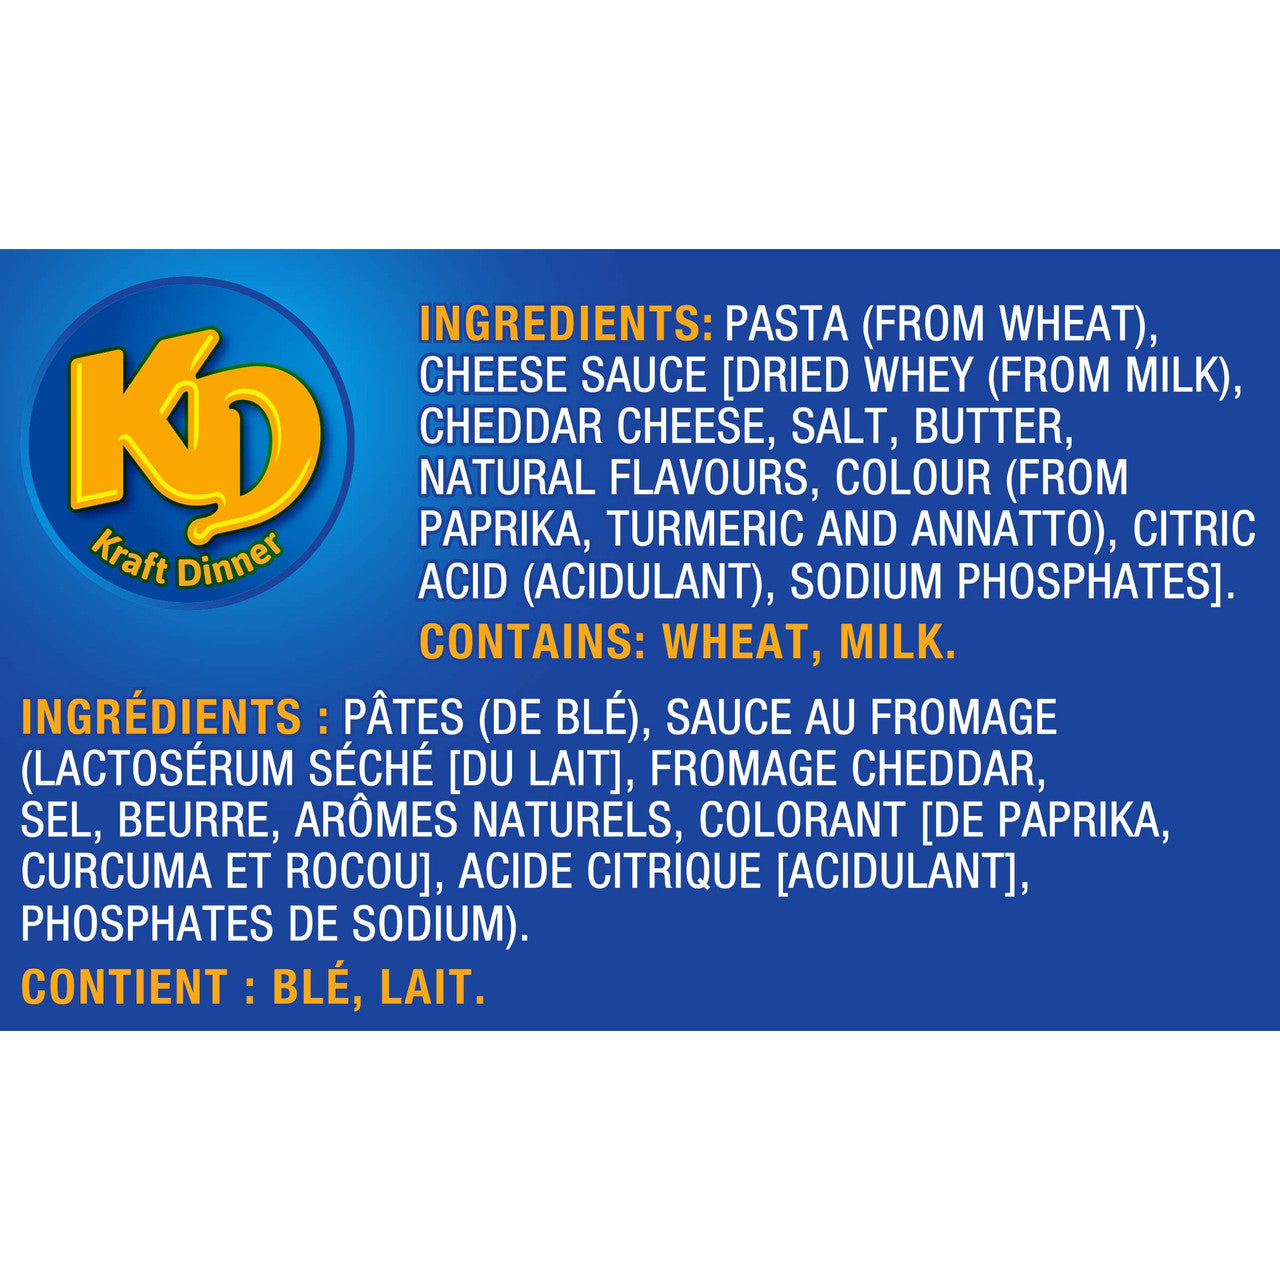 KD Kraft Dinner Original Macaroni & Cheese, 225g/7.9 oz. {Imported from Canada}